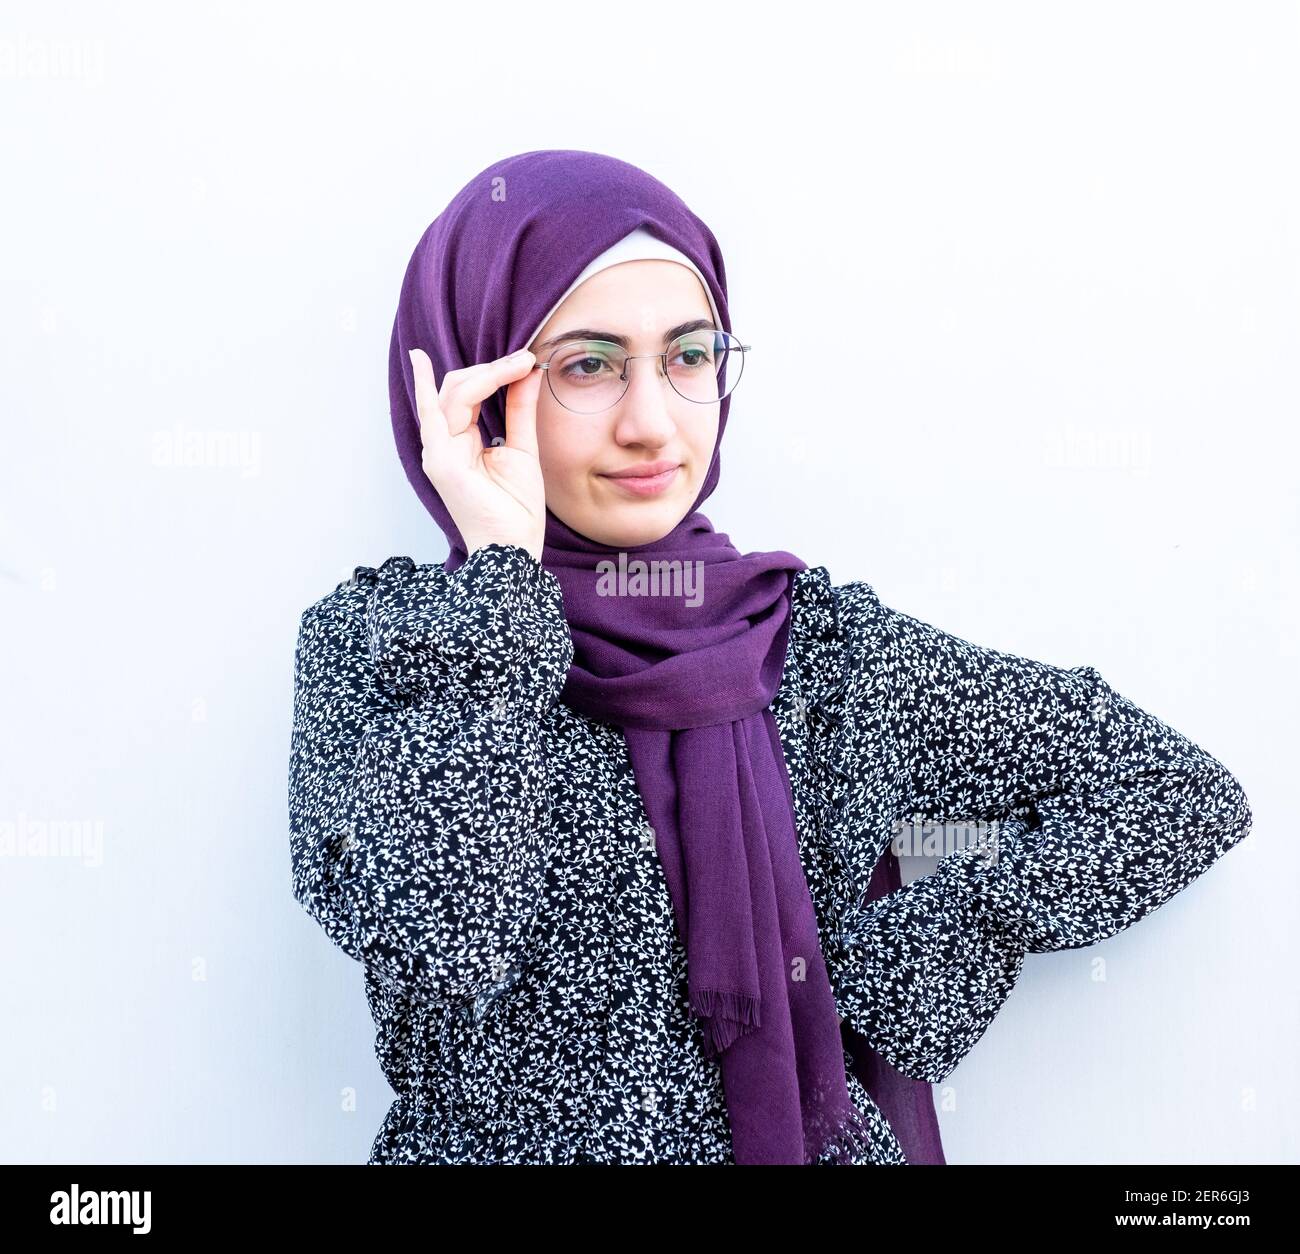 Arabic muslim girl holding her glasses on her face Stock Photo - Alamy